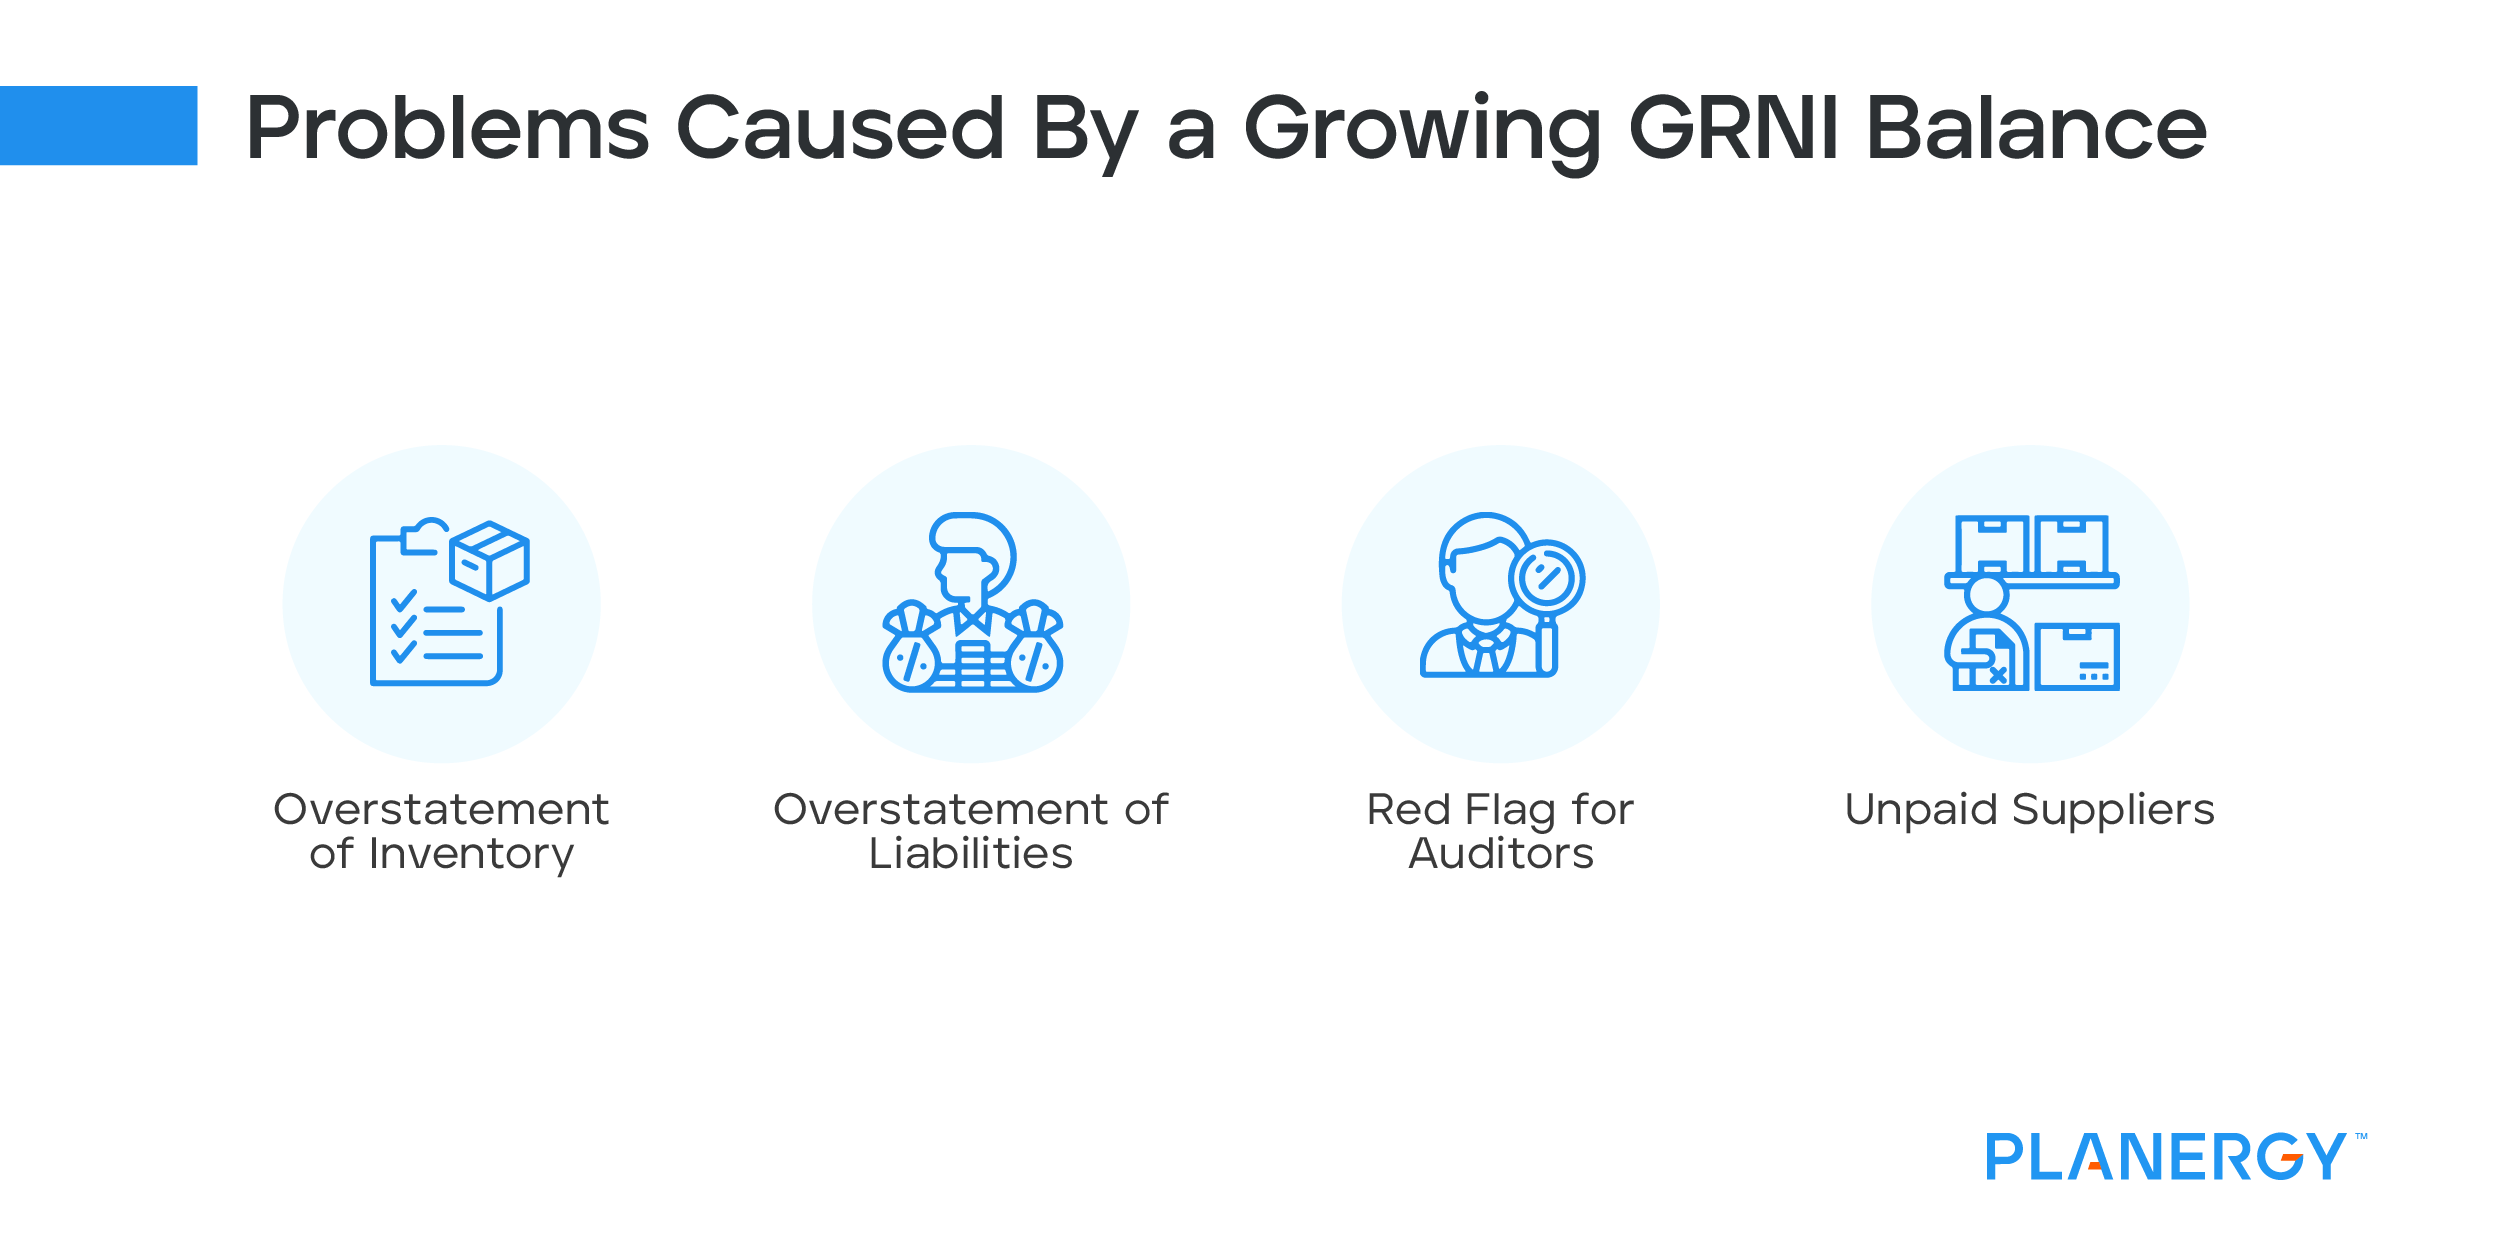 Problems Caused by a Growing GRNI Balance